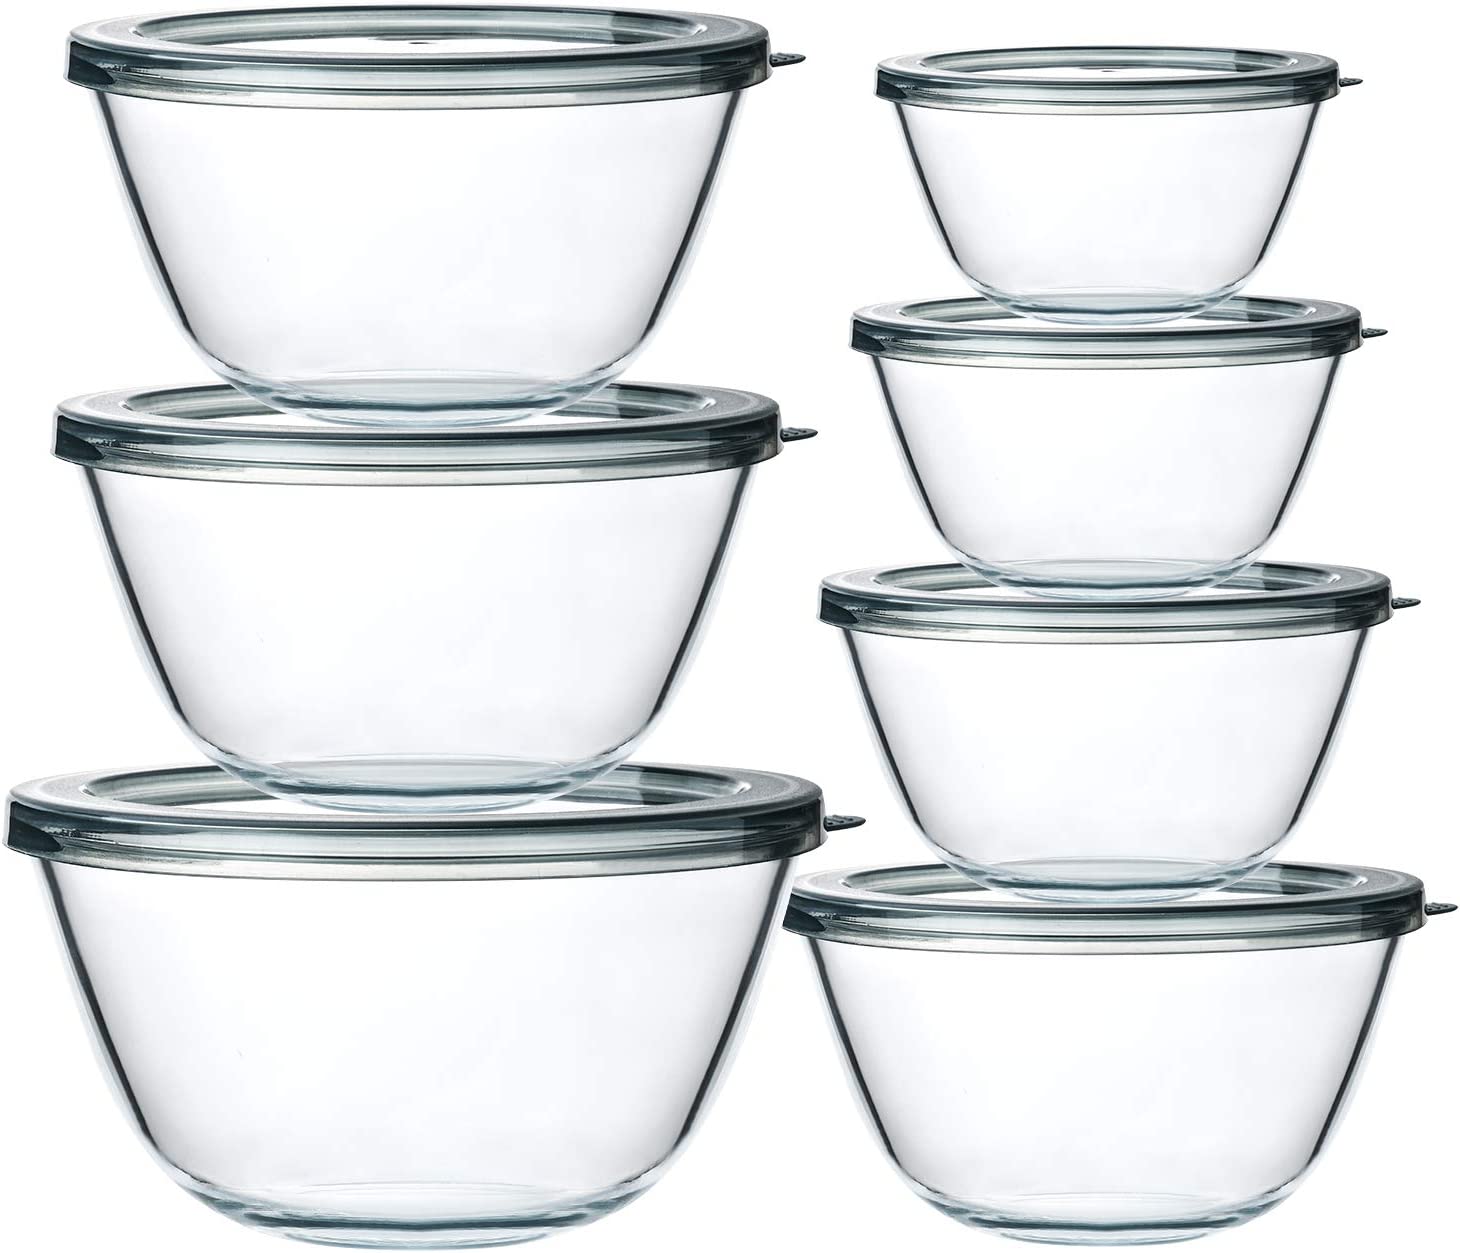 MCIRCO Chip-Resistant Borosilicate Glass Bowls With Lids, 7-Count